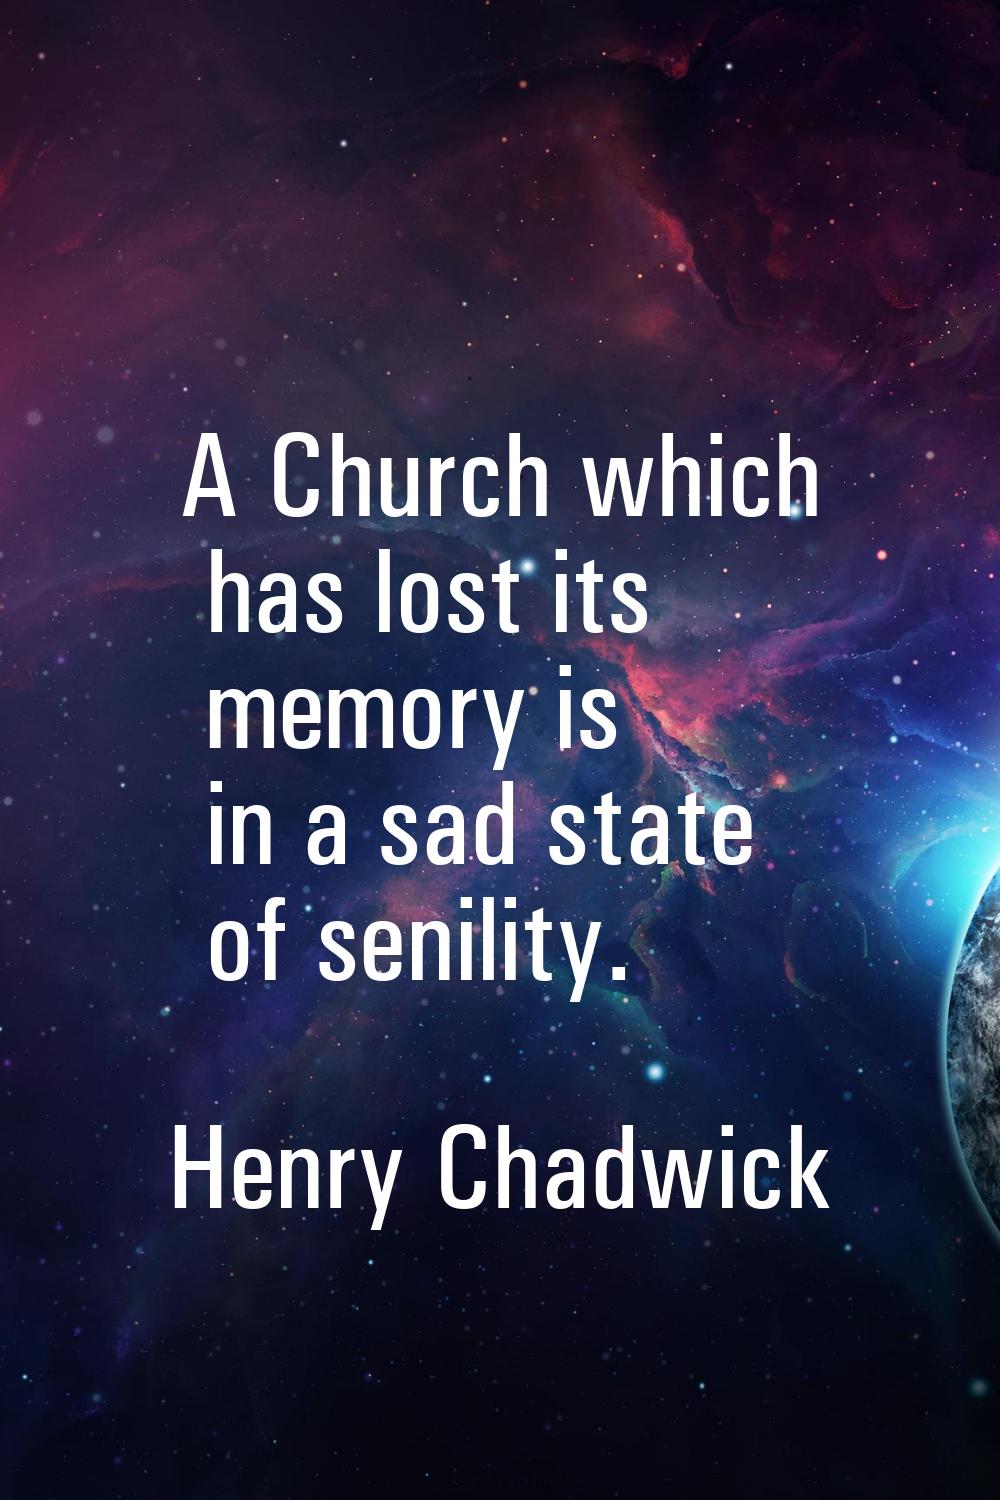 A Church which has lost its memory is in a sad state of senility.